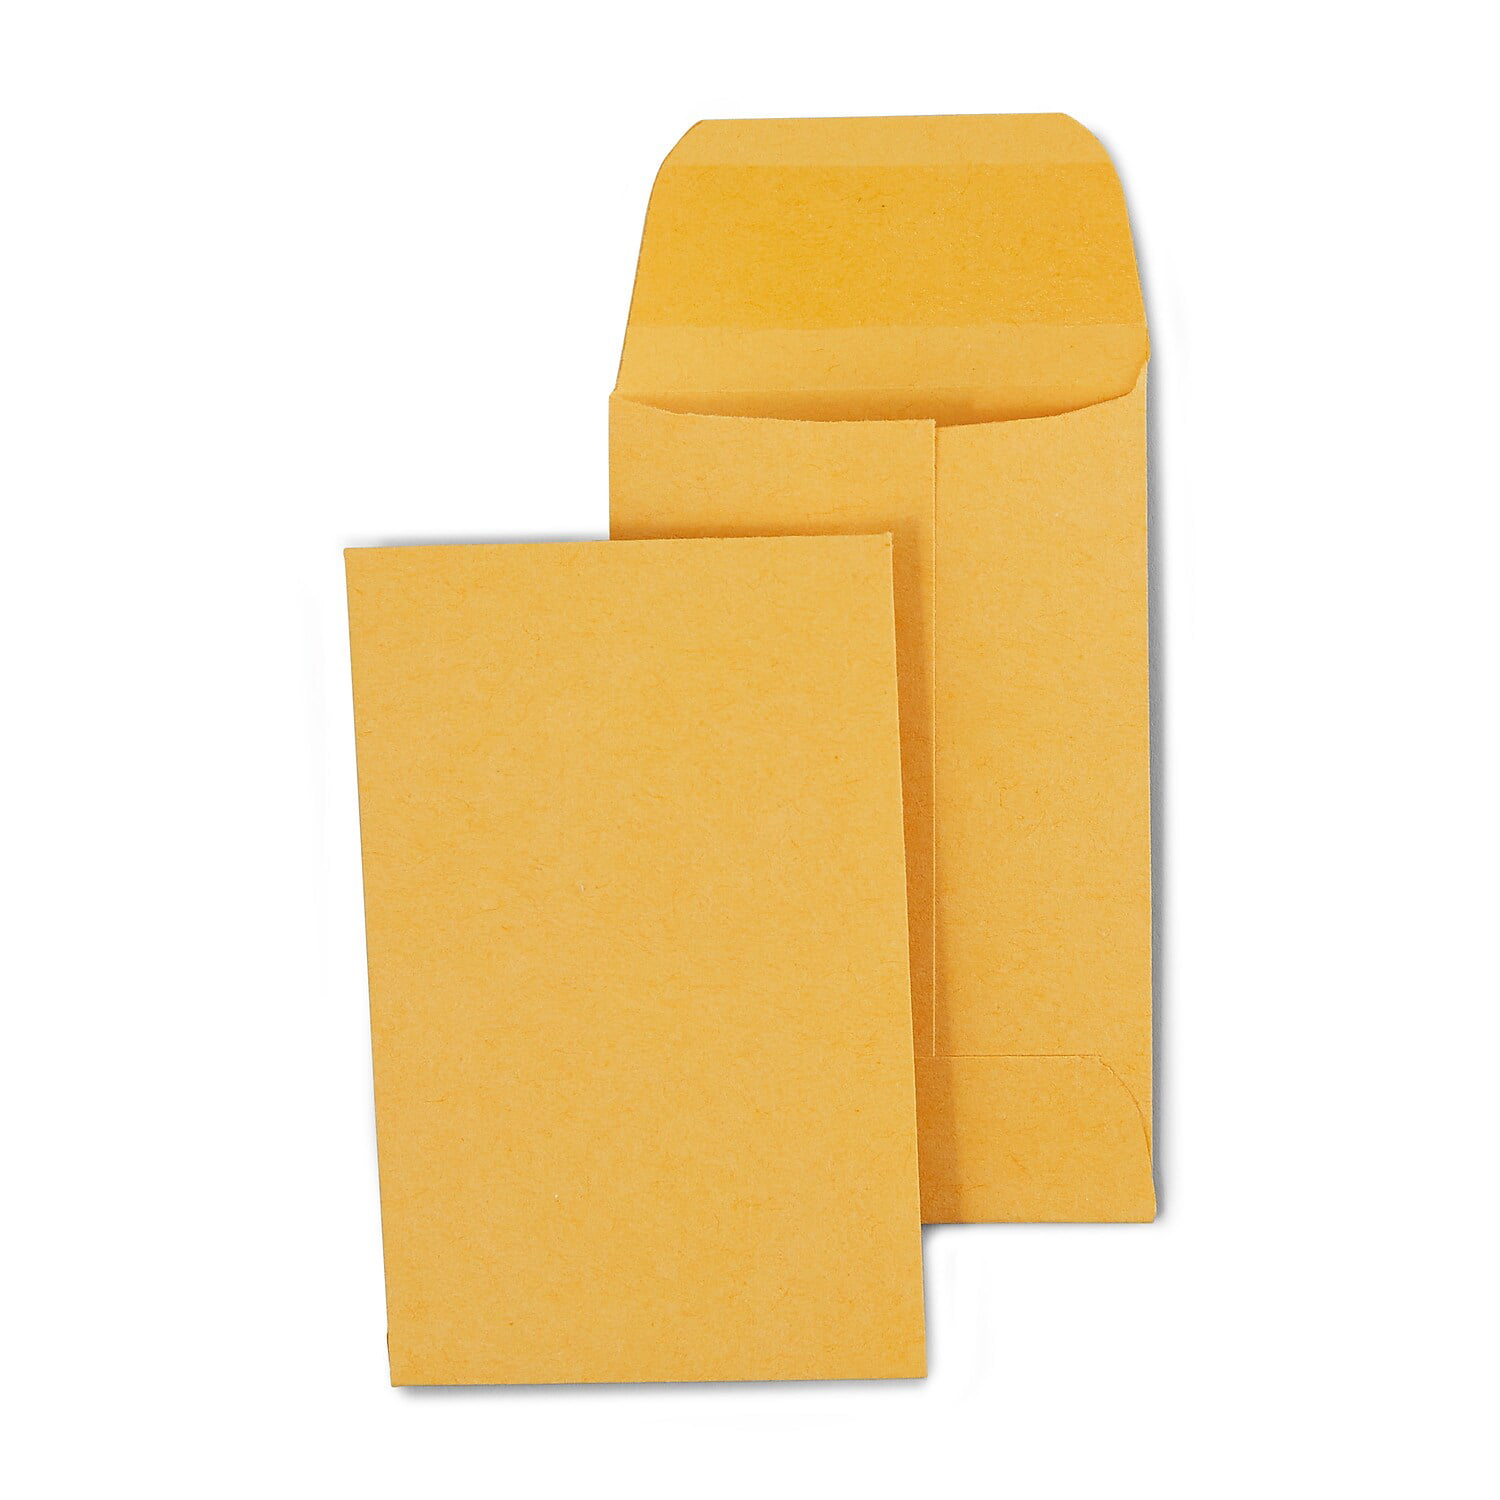 10 NEW KRAFT COIN ENVELOPES WITH GUMMED FLAP   #3  SIZE 2.5" BY 4.25"